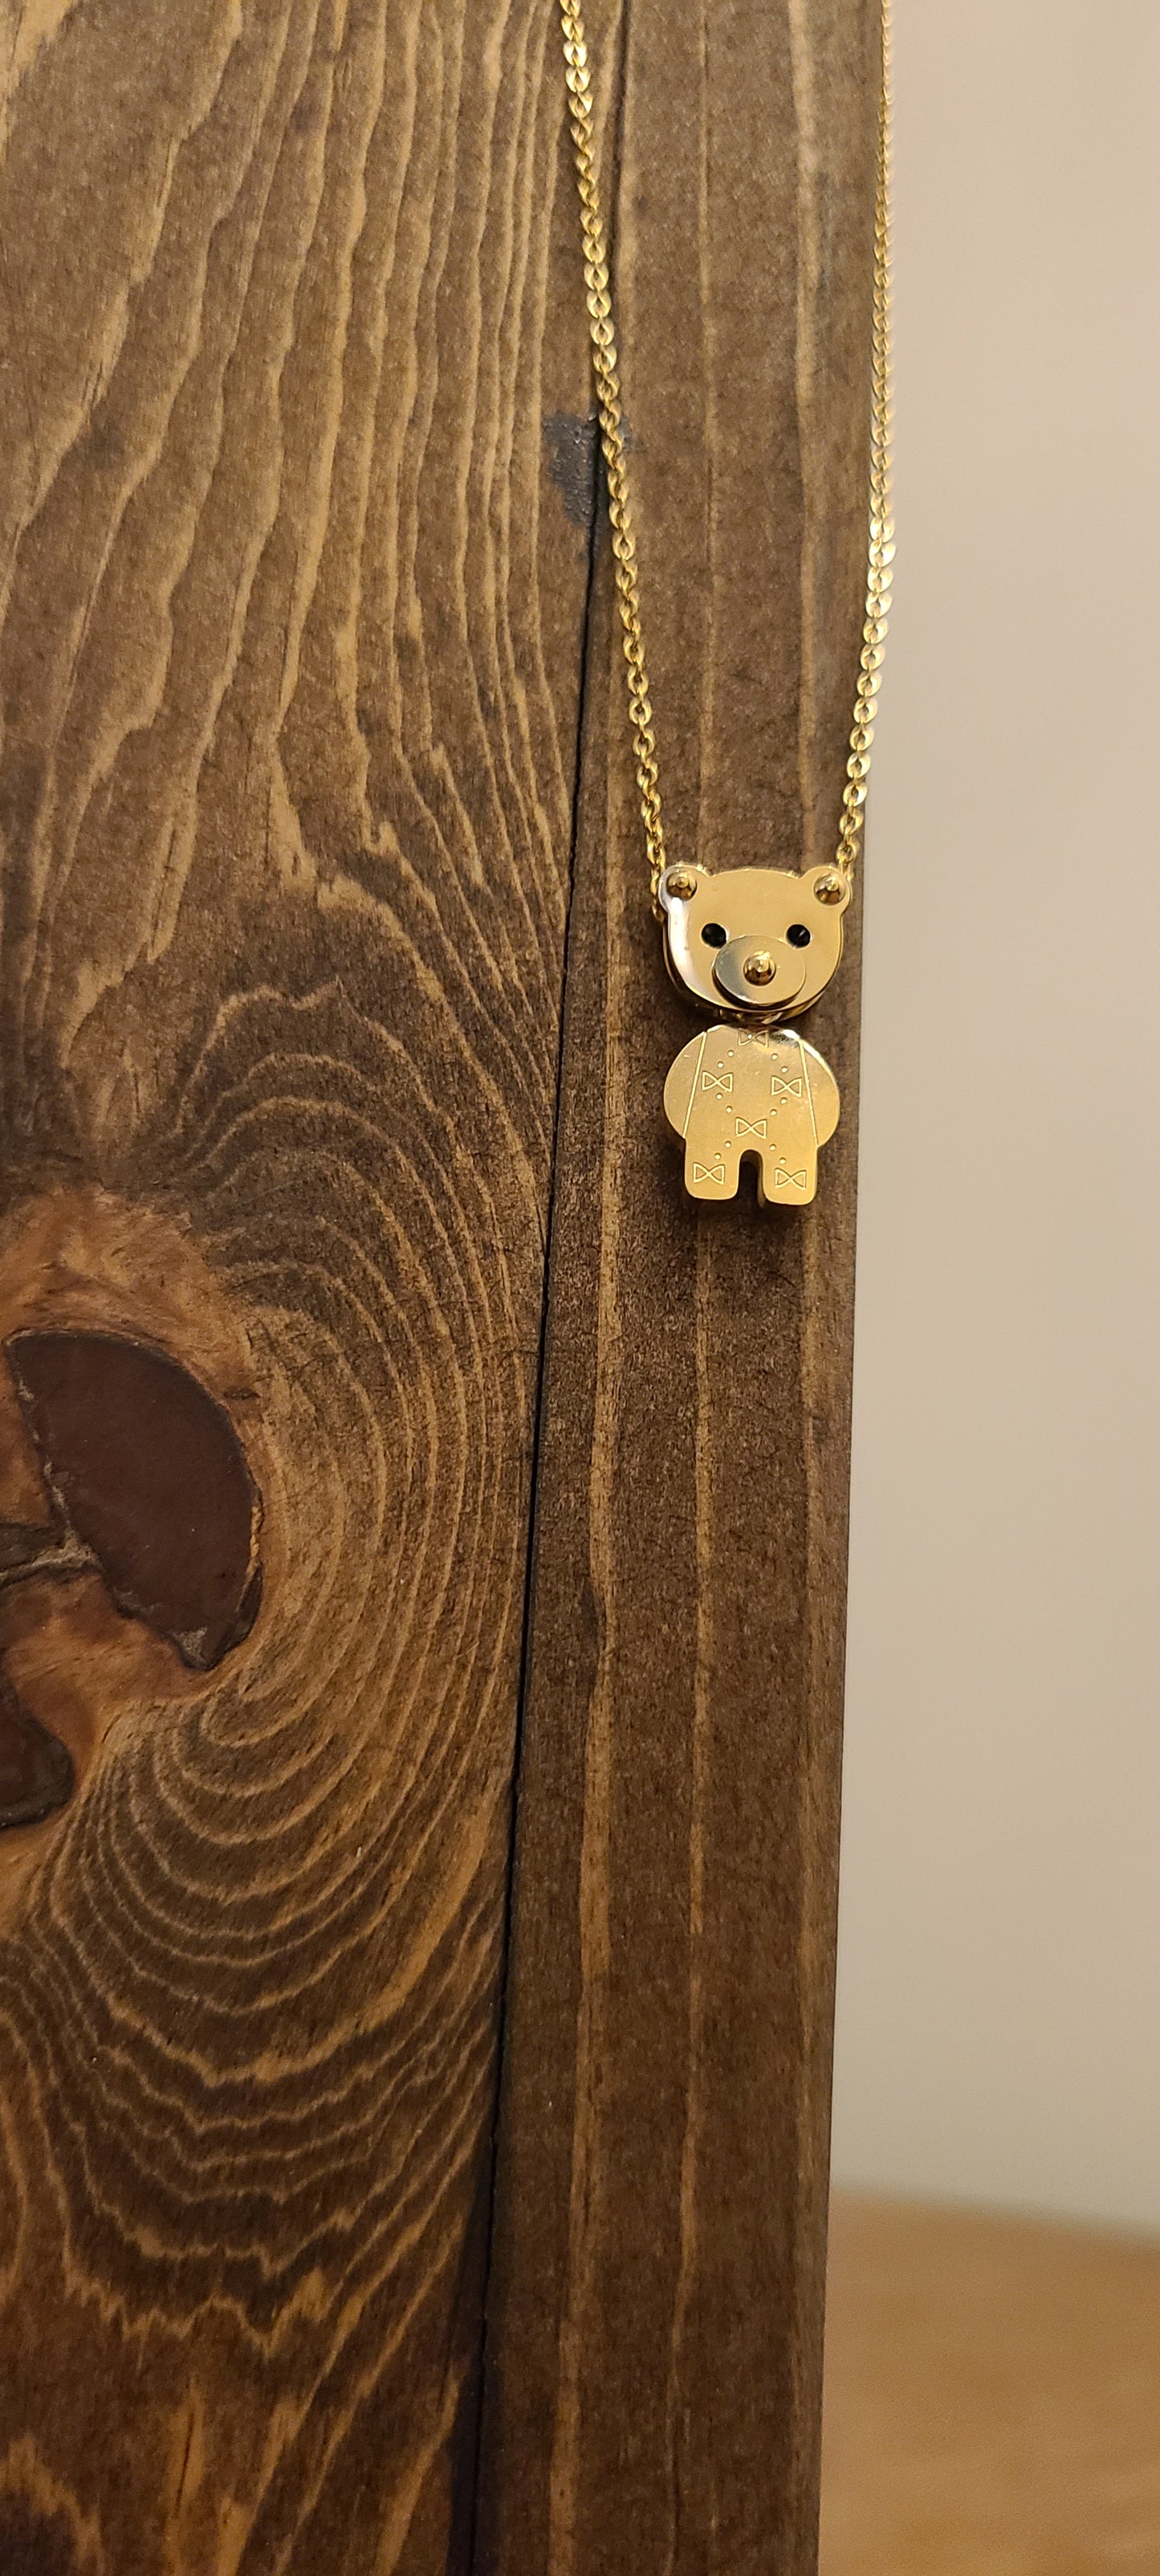 18K Gold Plated Stainless Steel Charm Teddy Bear Necklace.